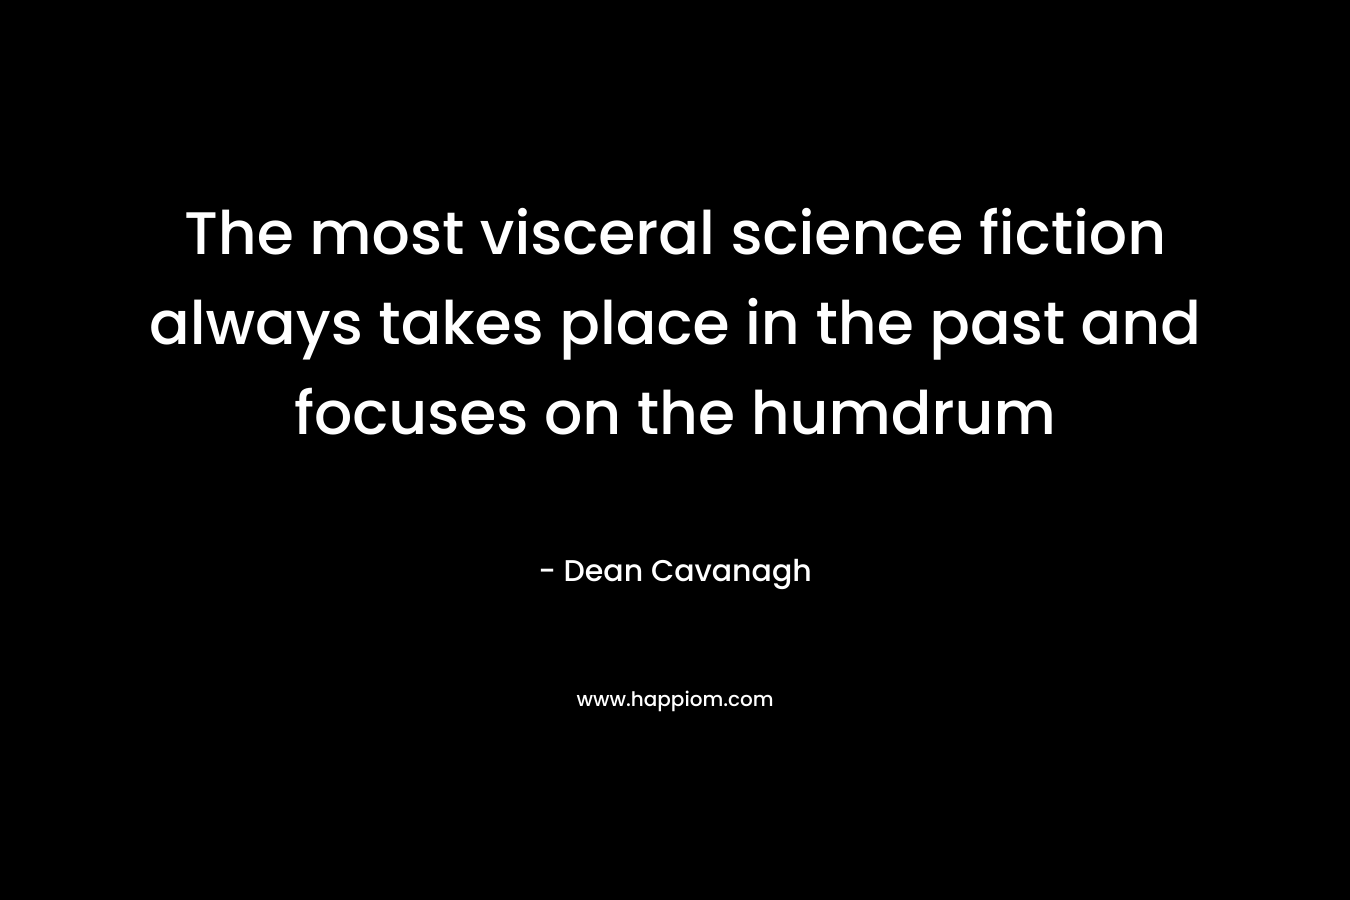 The most visceral science fiction always takes place in the past and focuses on the humdrum – Dean Cavanagh